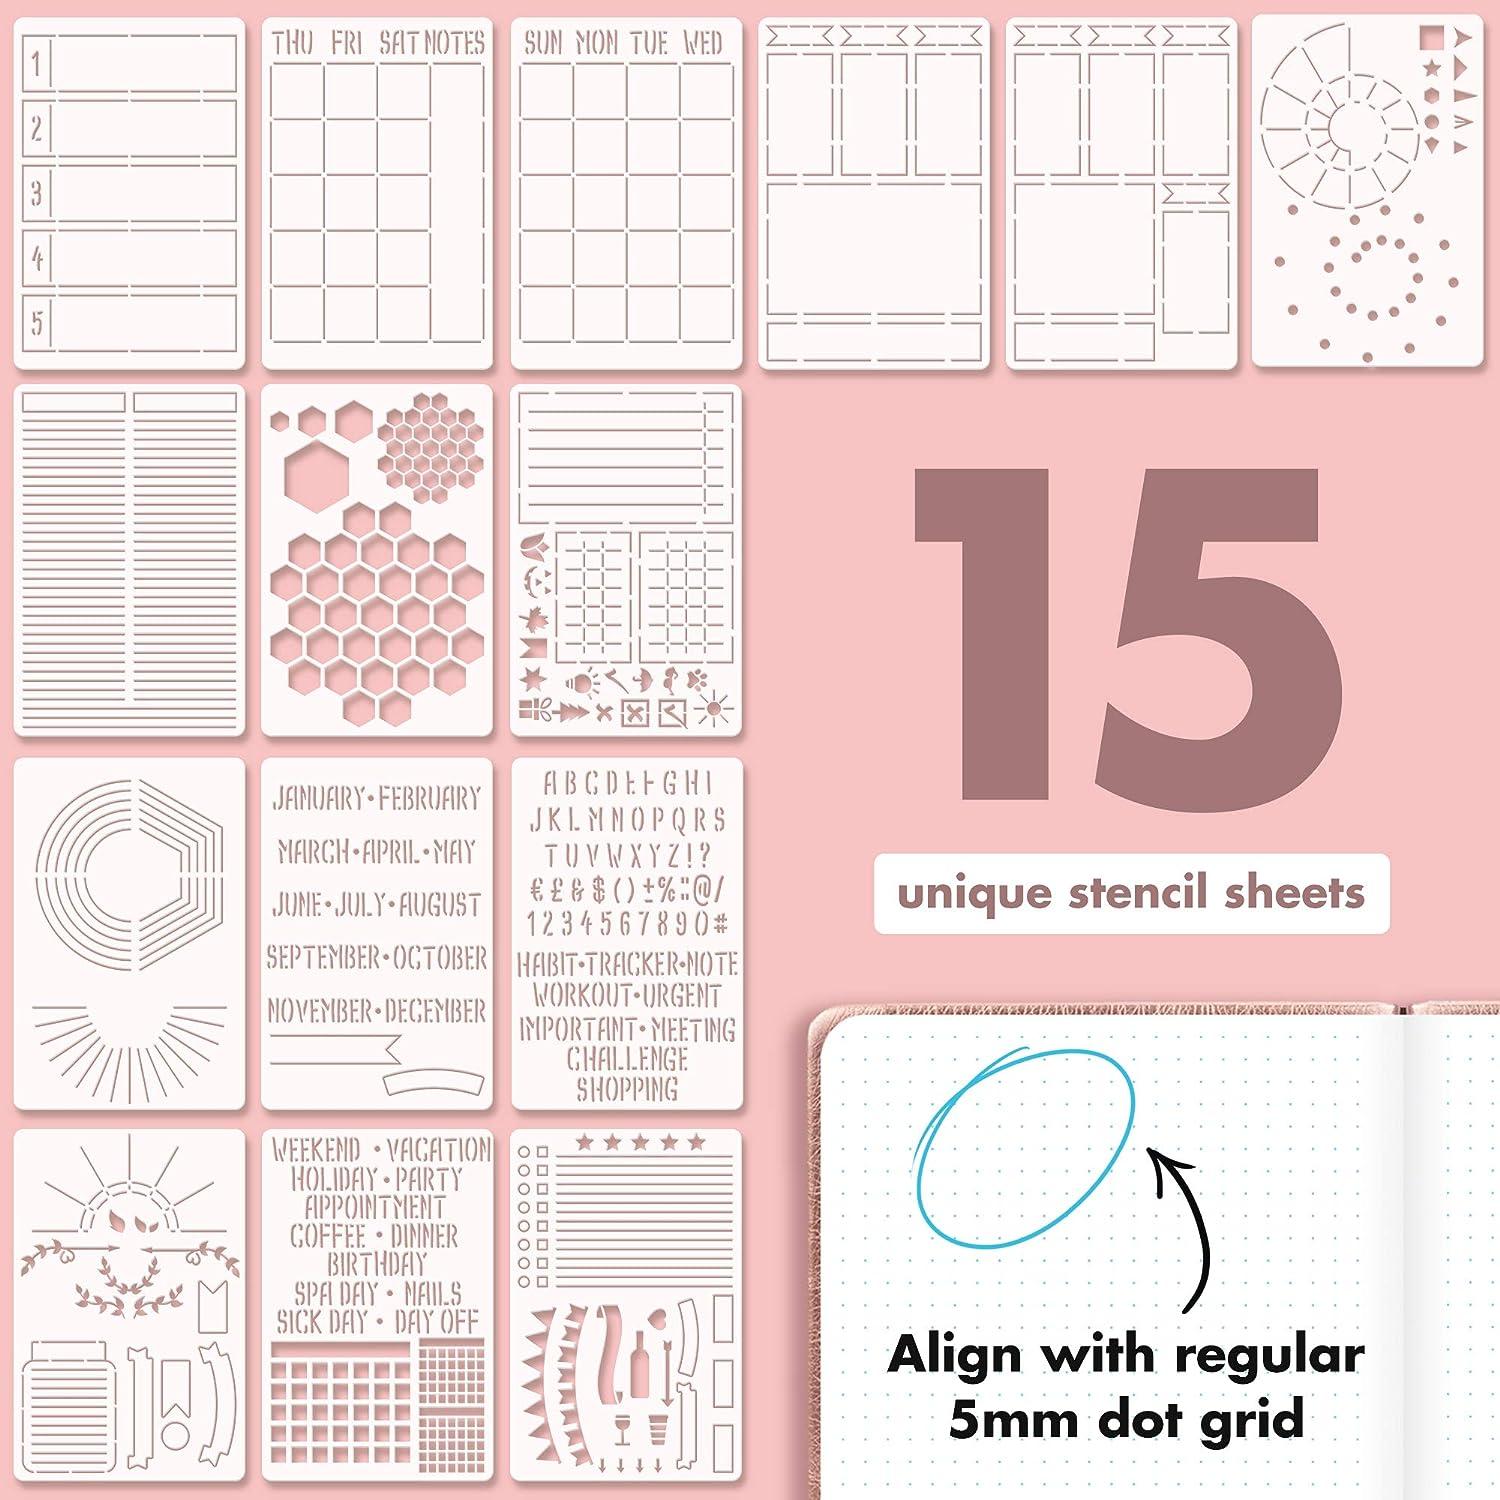 Easy to Use Stencil Set for Dotted Journals - Time Saving Planner  Accessories/Supplies Kit Makes Creating Layouts Easy - Incl. Bullet Point